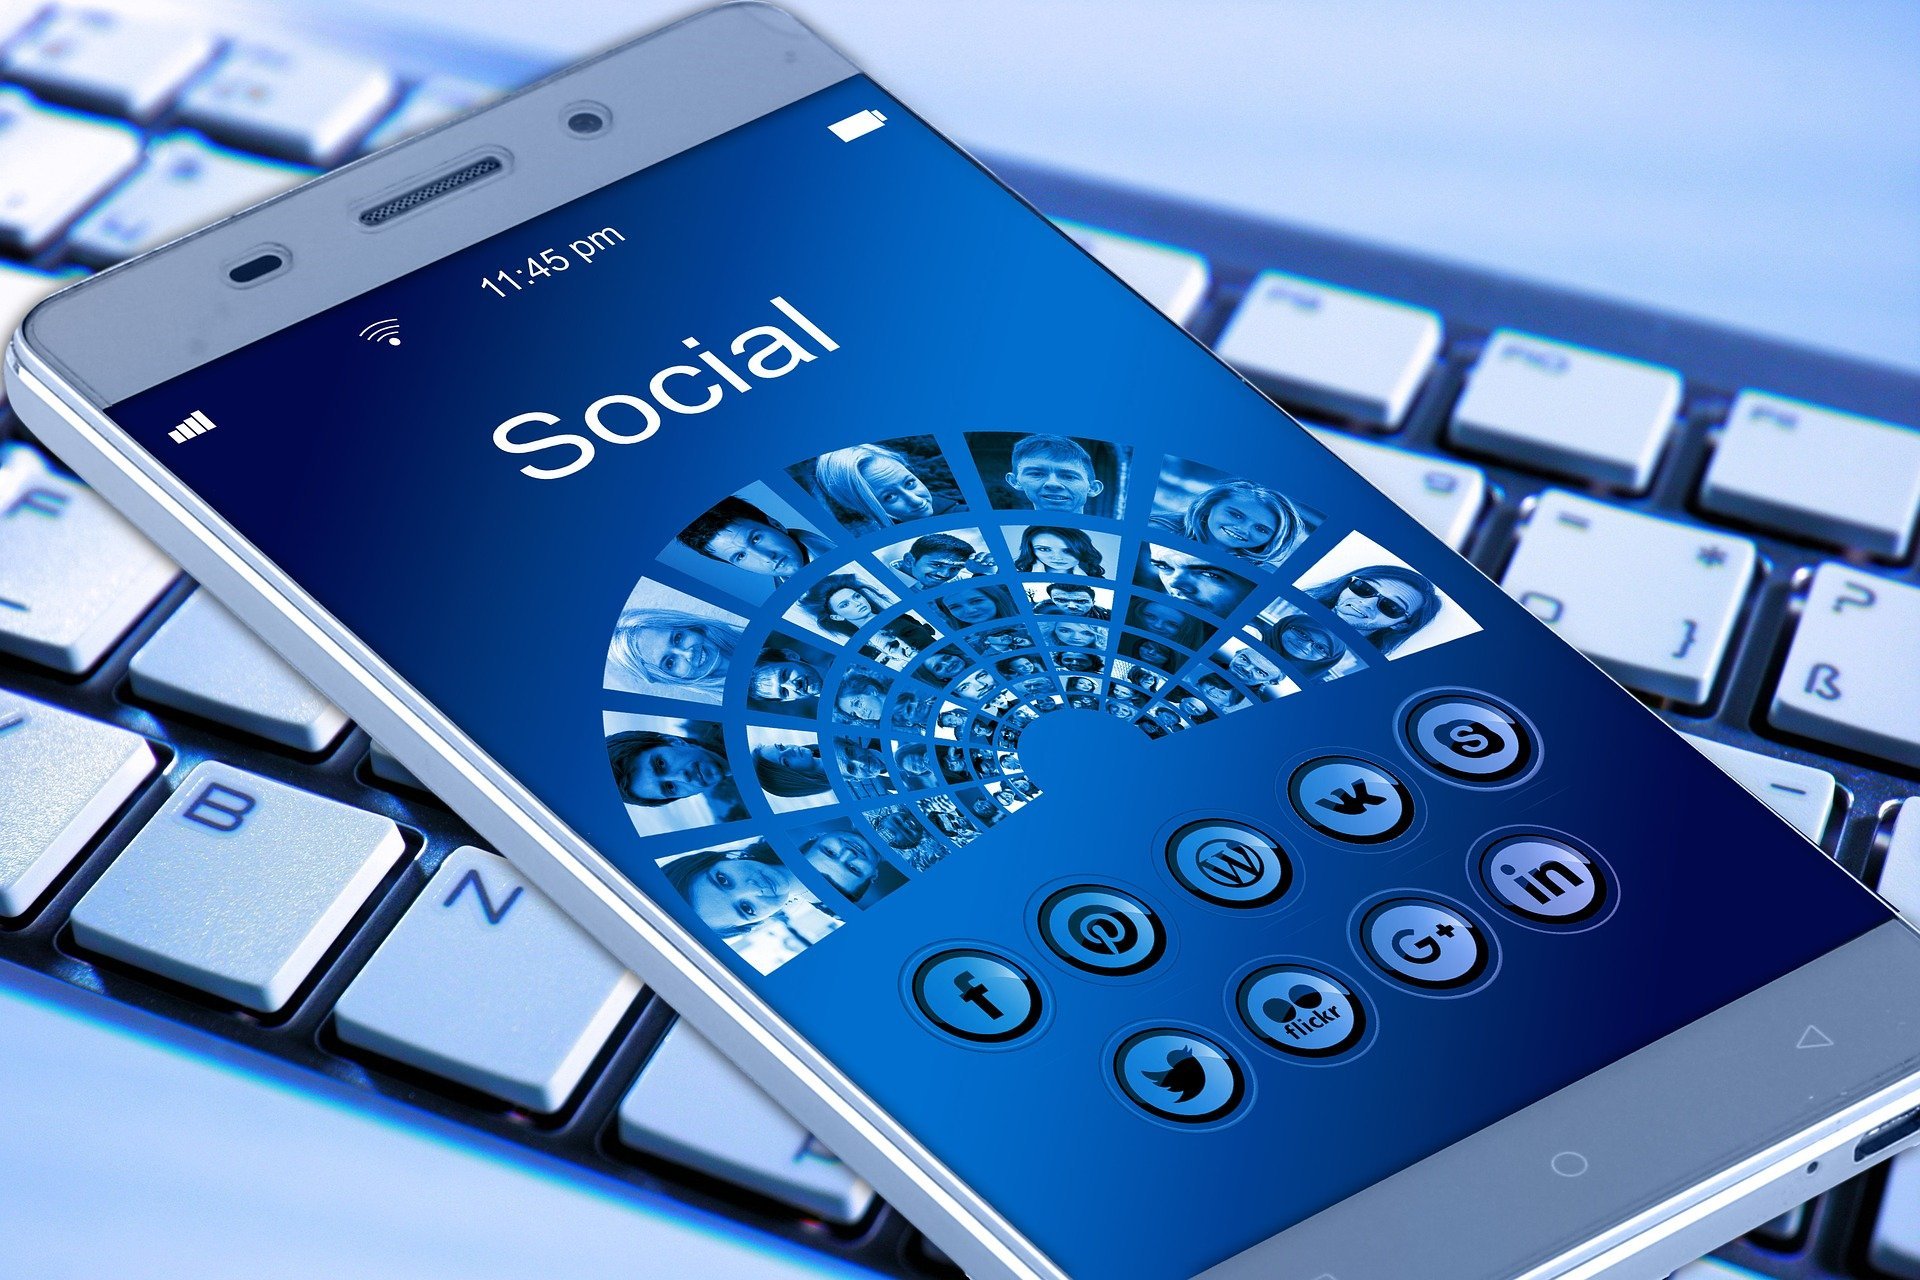 Turn your mobile application services into a social media platform